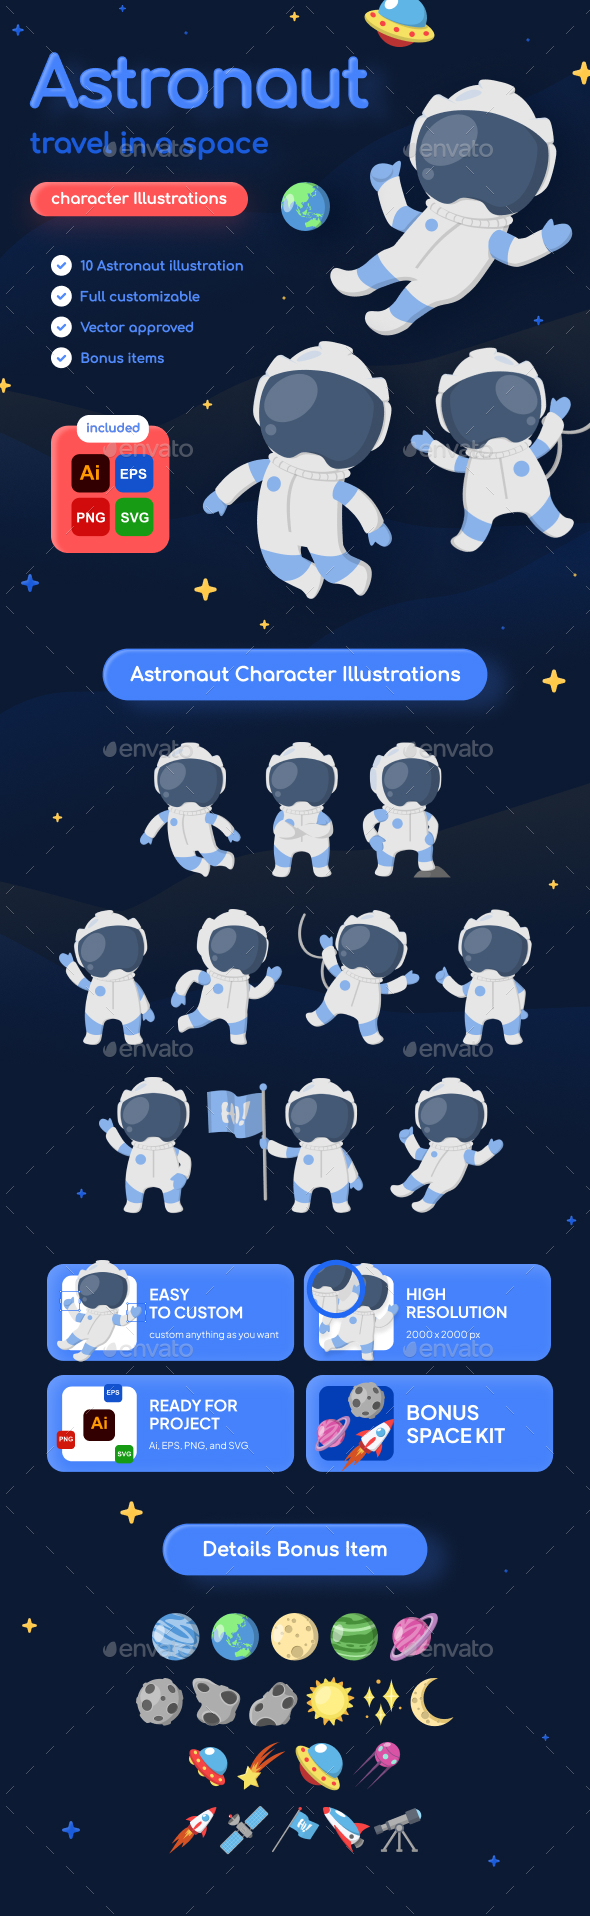 Astronaut Travel in Space Character Illustrations